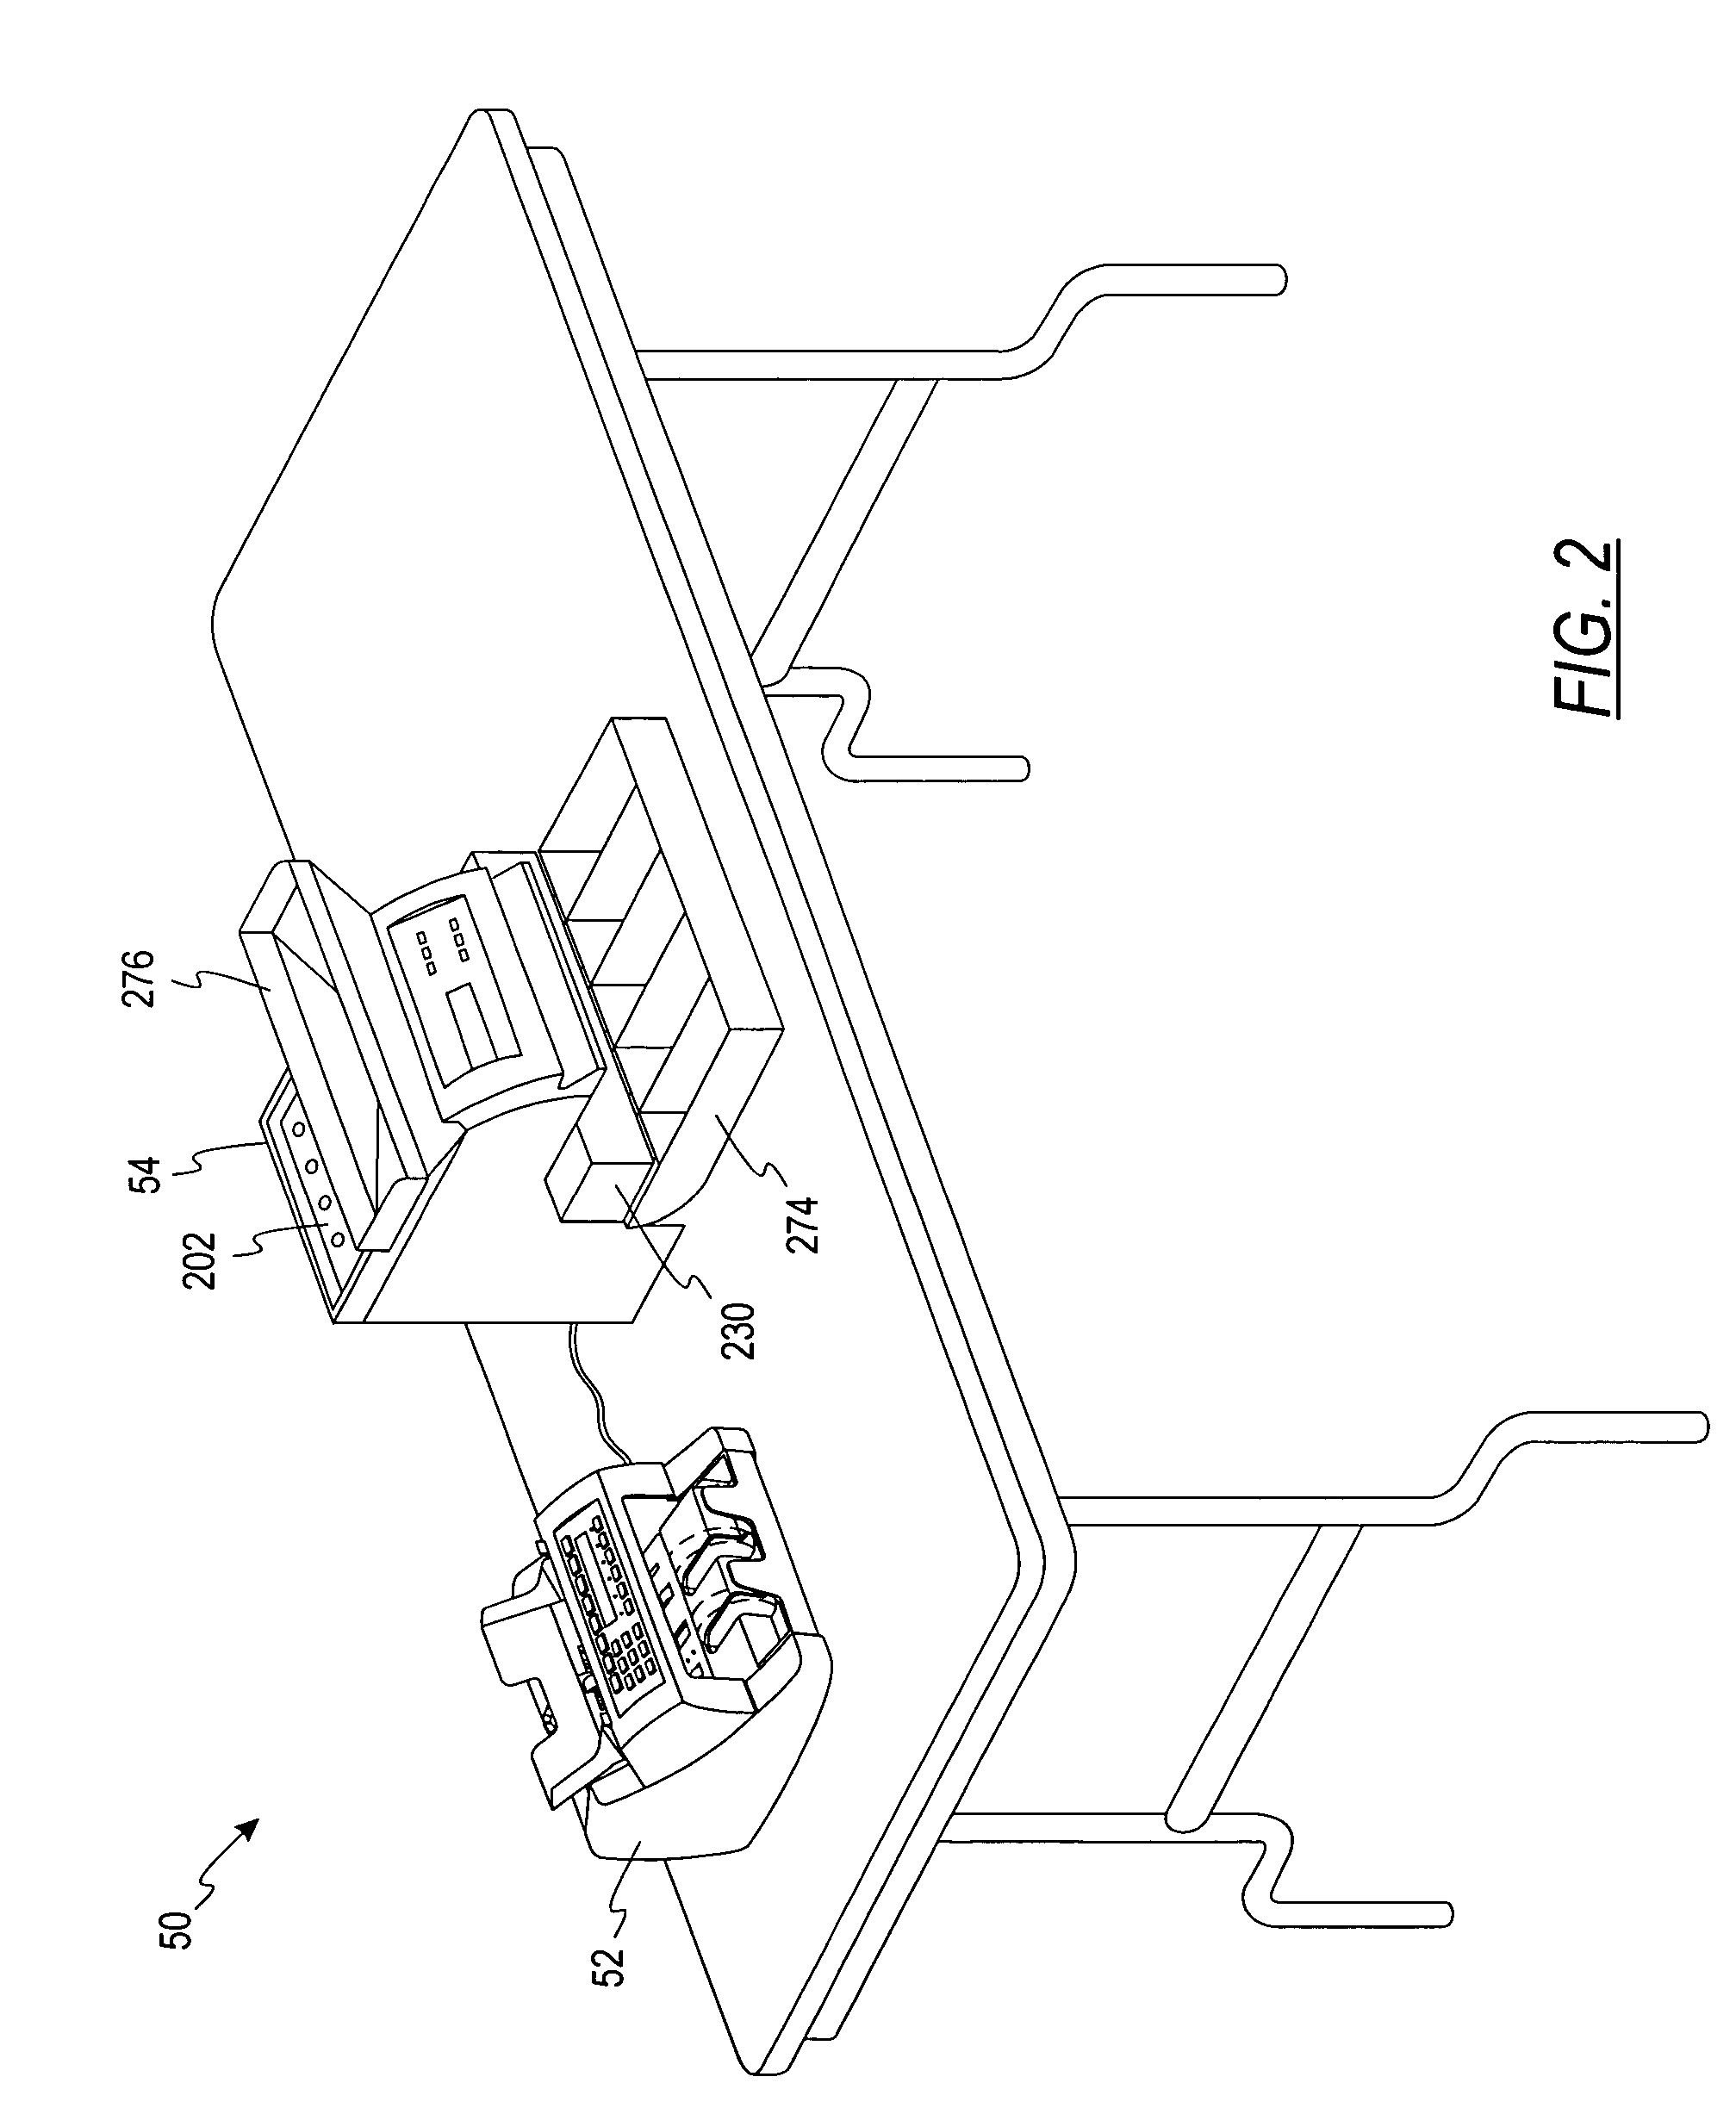 Method and apparatus for processing currency bills and coins